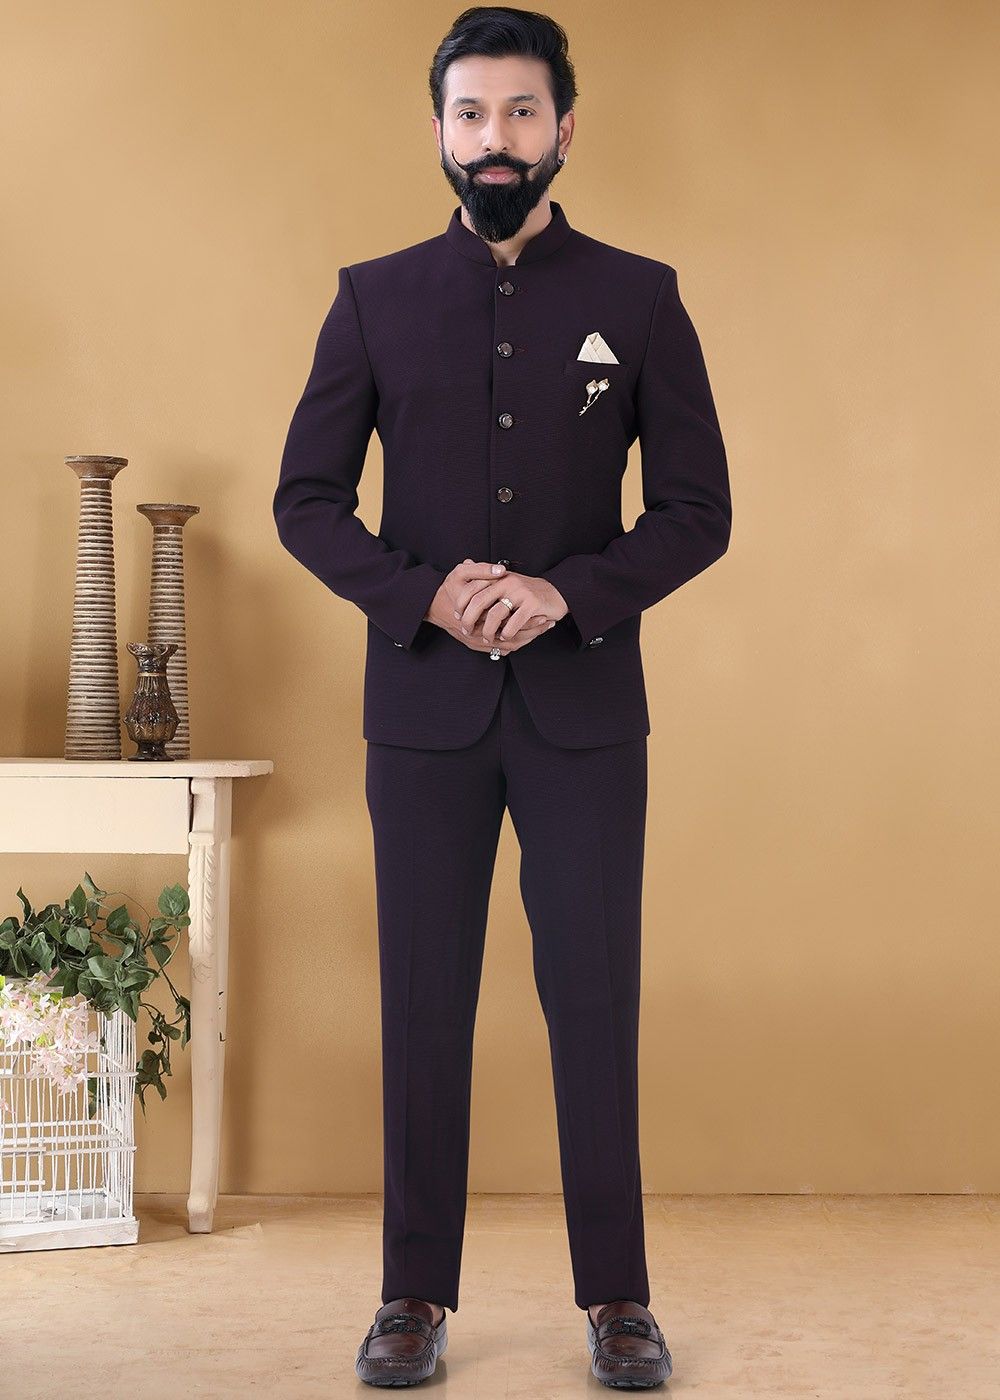 Indian Maharaja Style Velvet Grey Color Jodhpuri Bandhgala Blazer With  White Trouser | Party Wear for Open and Daylight Functions (Father Son  Combo) : Amazon.co.uk: Handmade Products